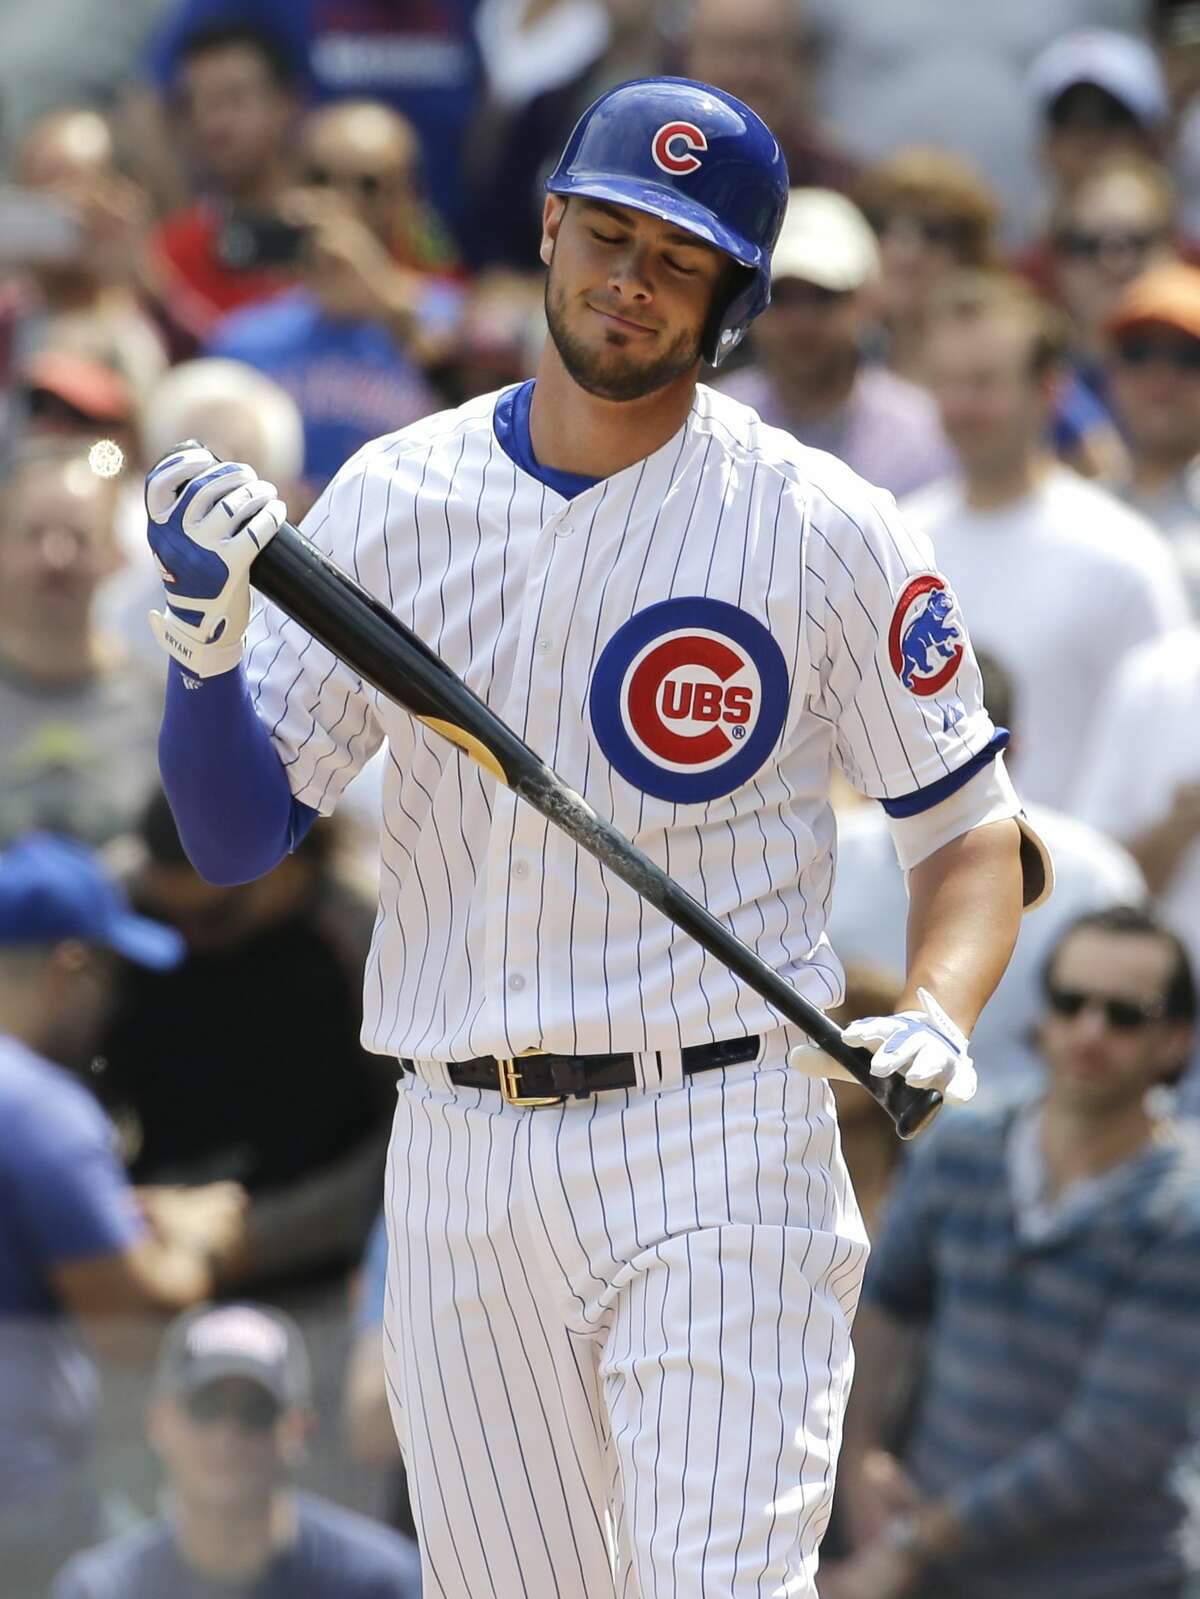 Anthony Rizzo, Kris Bryant Among 5 Cubs Named as All-Star Game